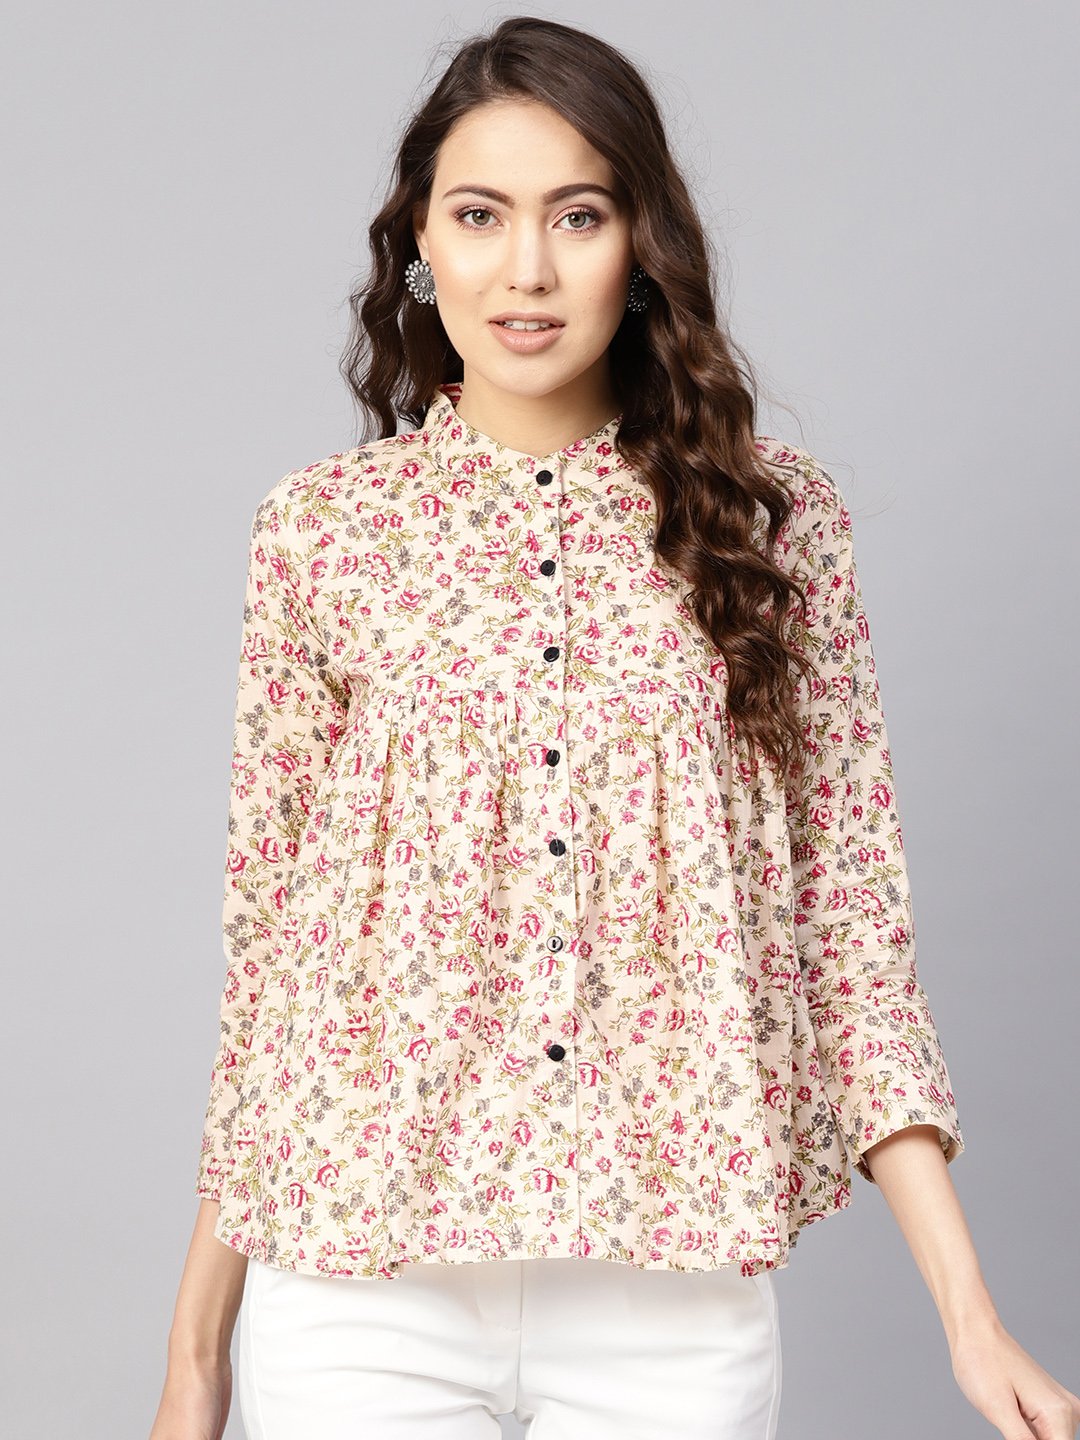 Women's Beige & Pink Printed Shirt Style Top - Nayo Clothing